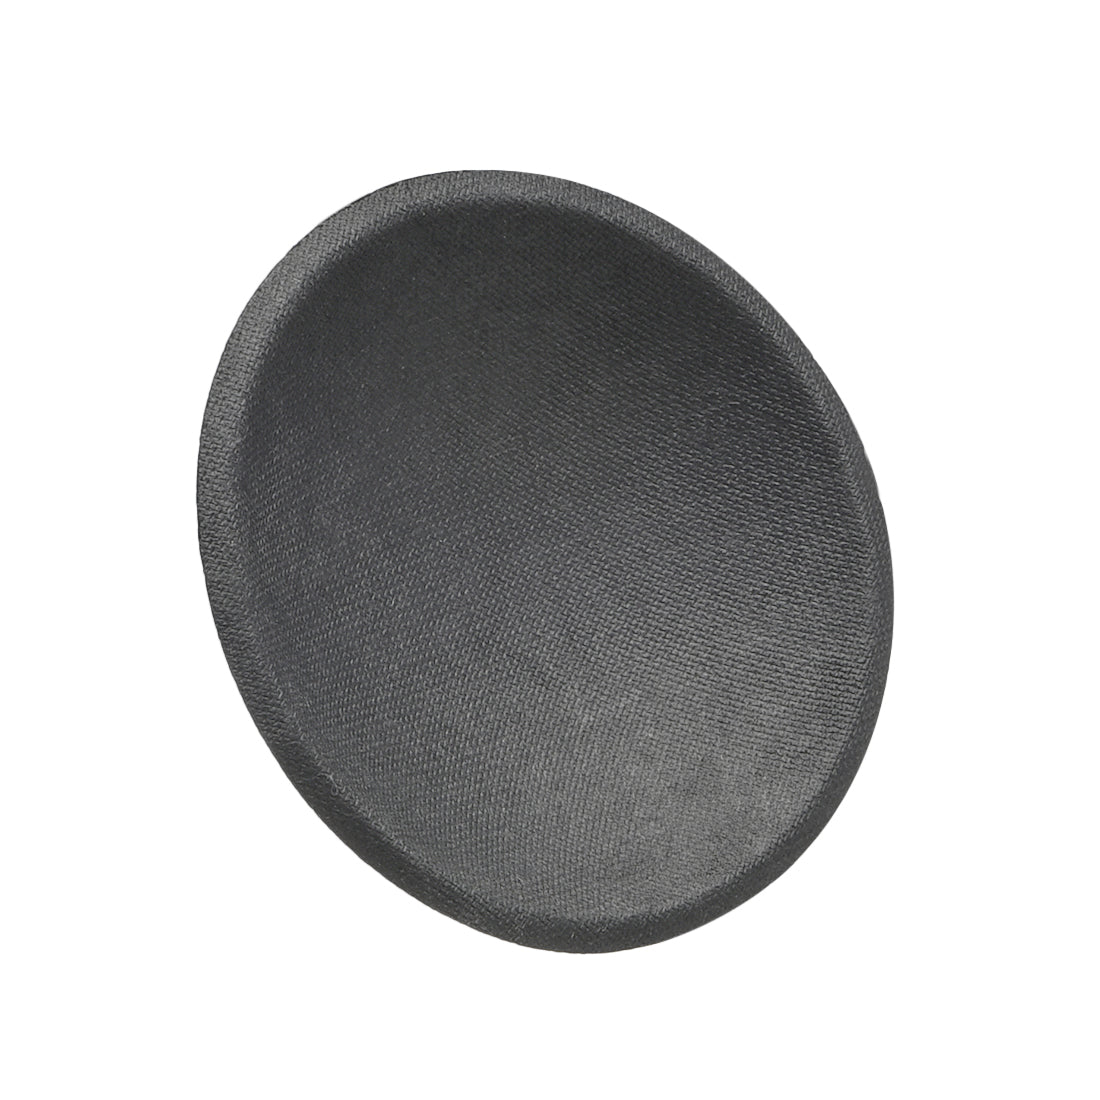 uxcell Uxcell Speaker Dust Cap 45mm/1.8" Diameter Subwoofer Paper Dome Coil Cover Caps